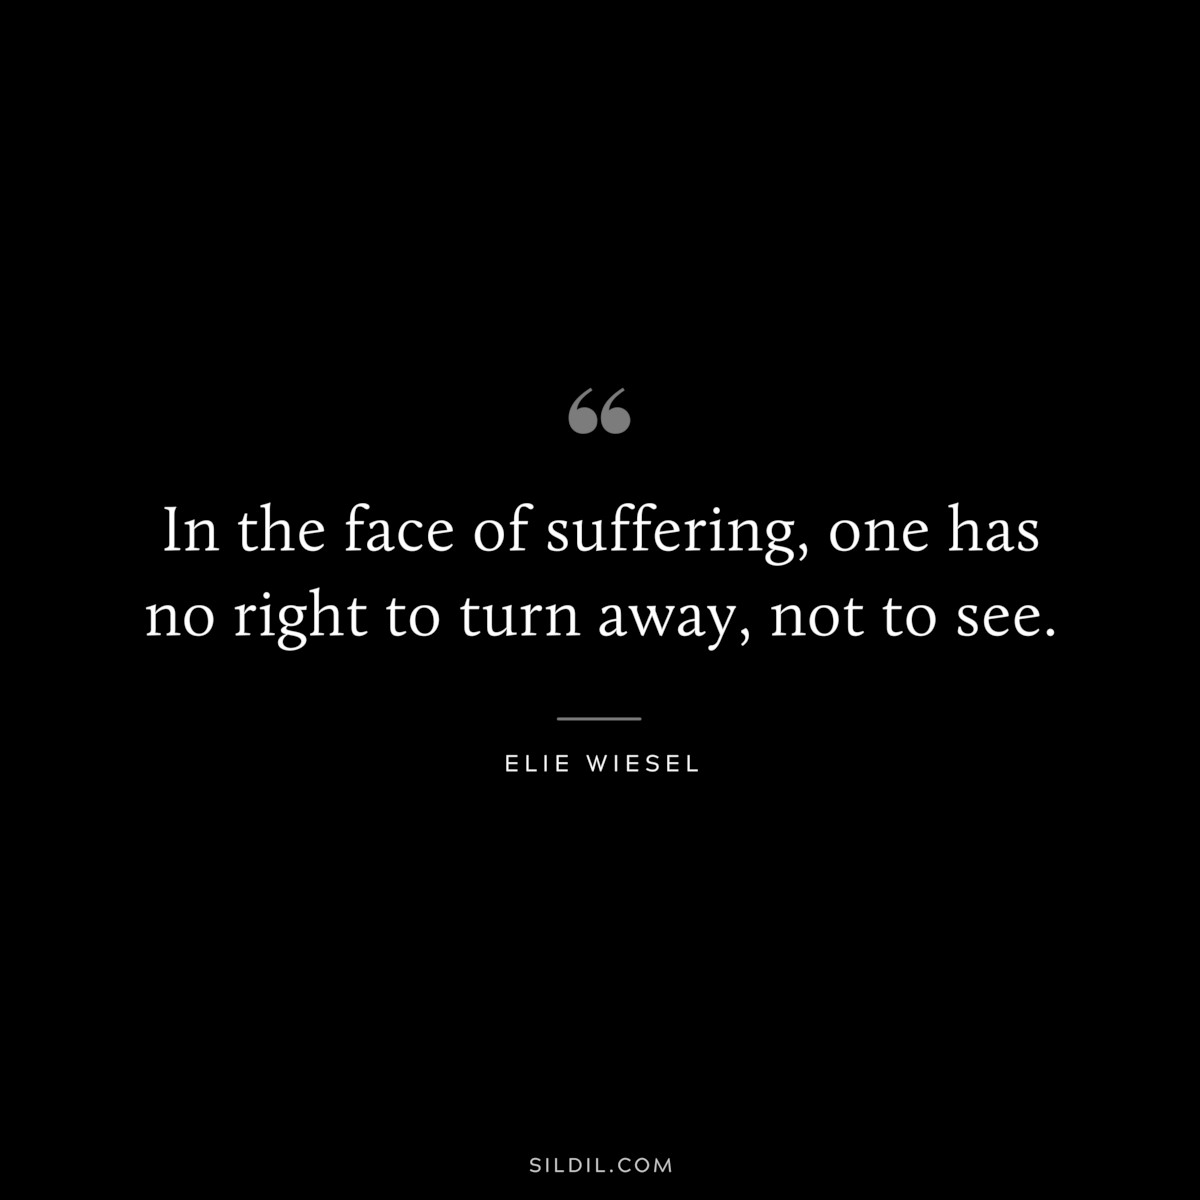 In the face of suffering, one has no right to turn away, not to see. ― Elie Wiesel